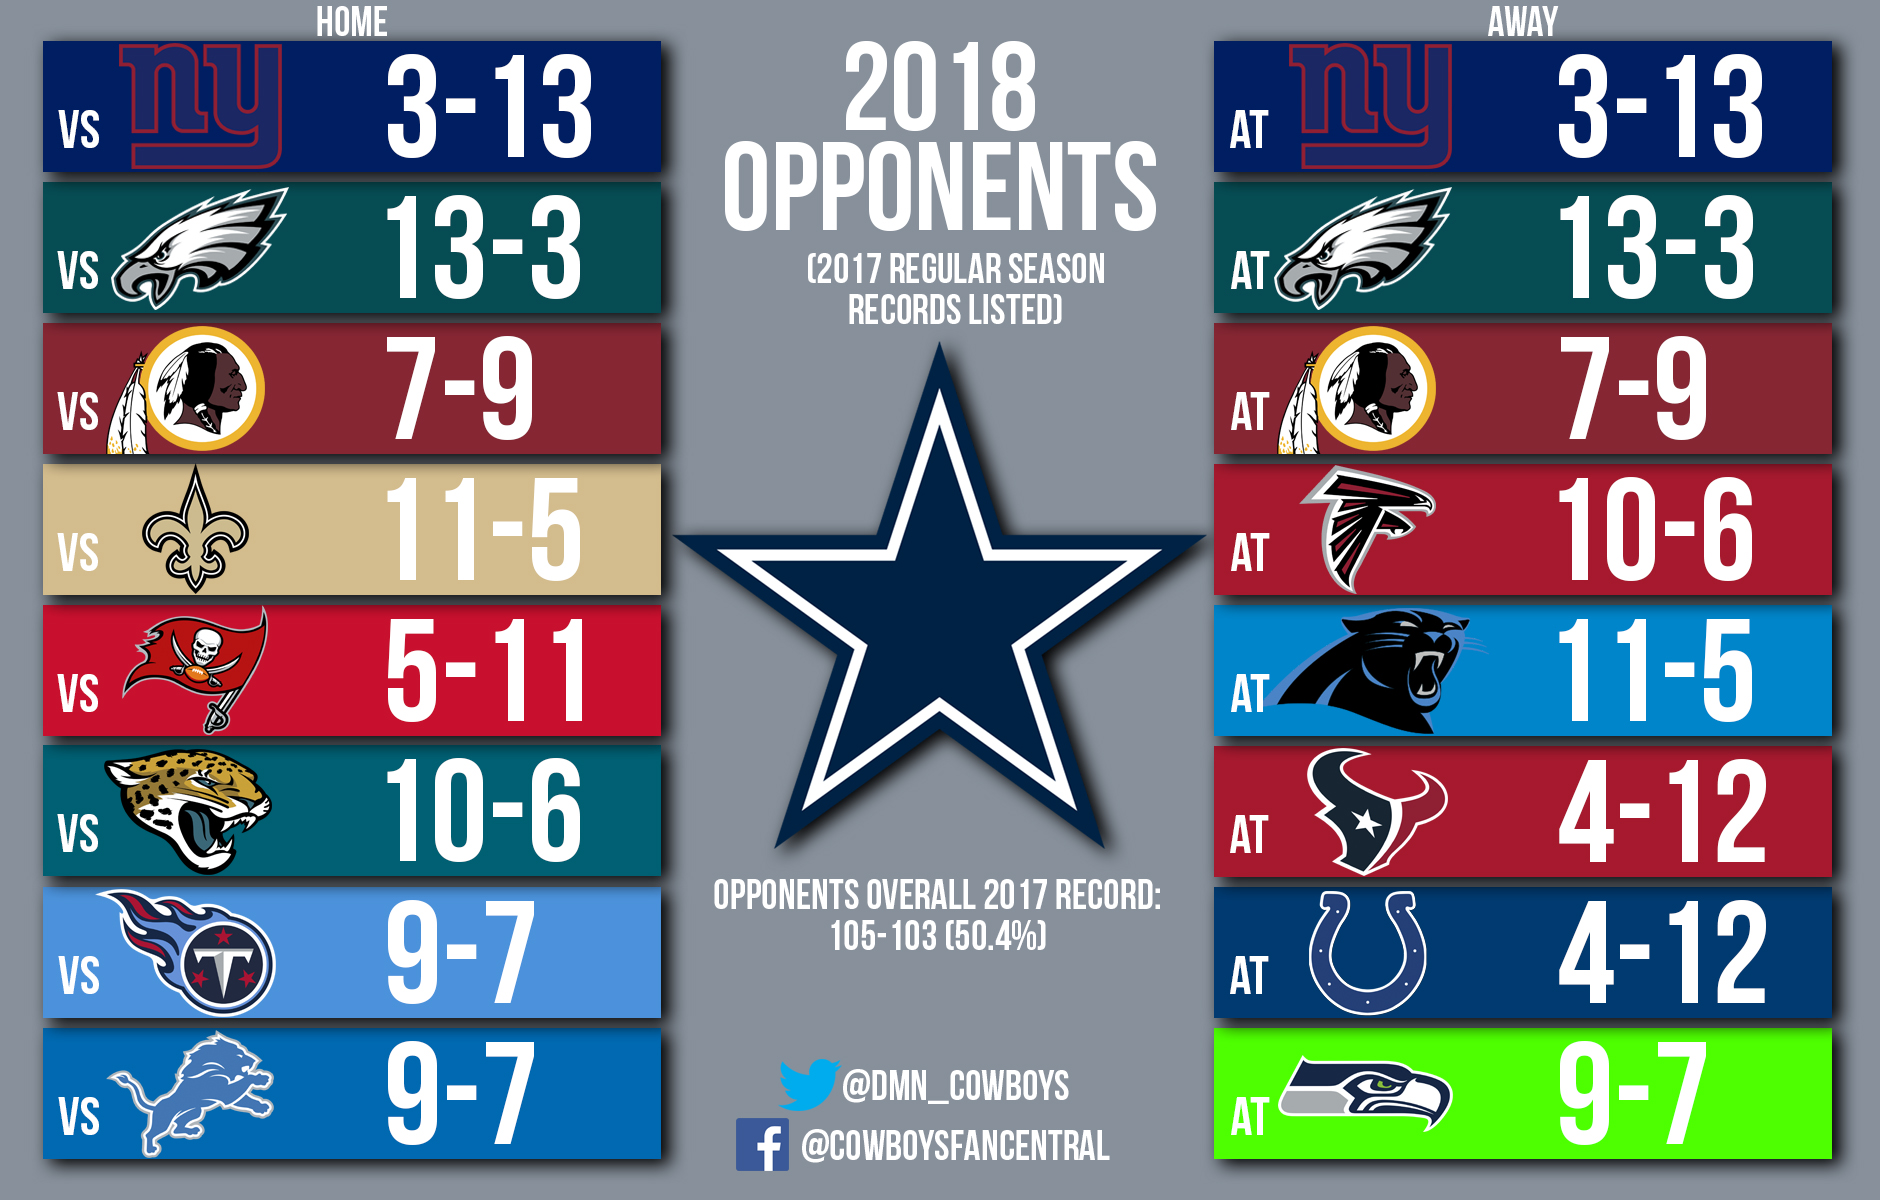 Cowboys 2018 schedule analysis: This will be the big question for Dallas  this season